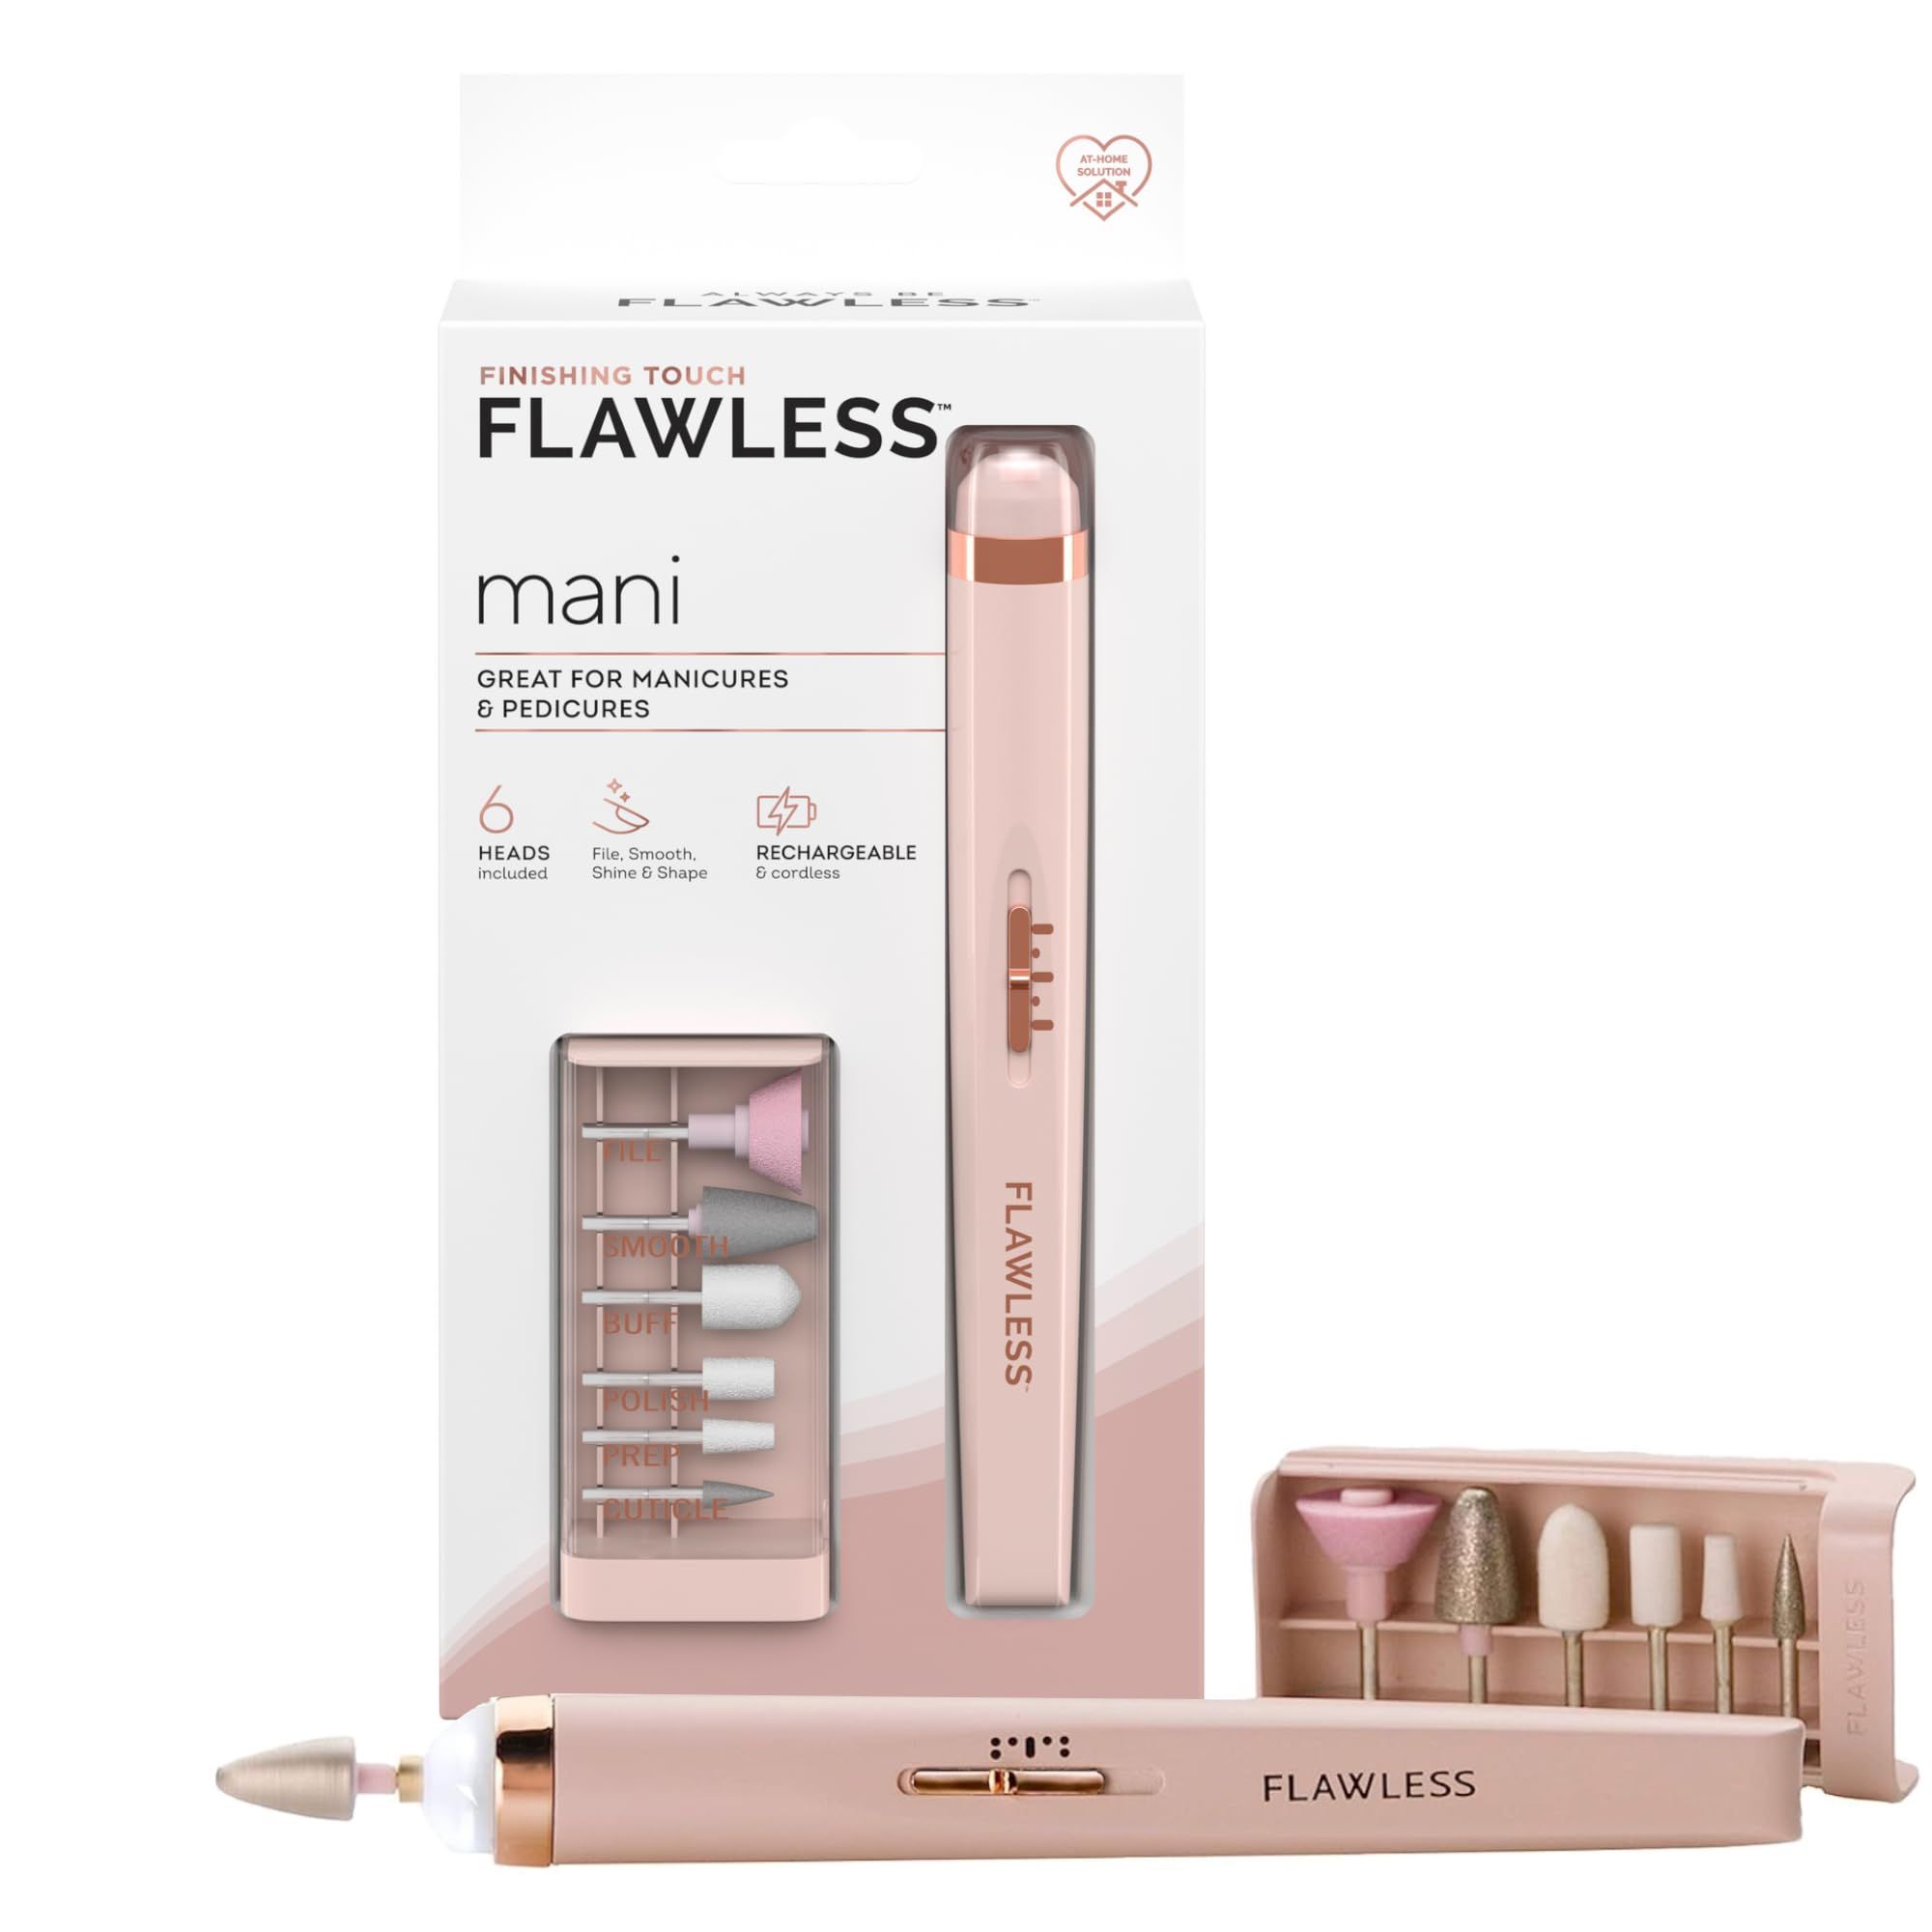 Finishing Touch Flawless Salon Nails Kit, Electronic Nail File and Full Manicure and Pedicure Too... | Amazon (US)